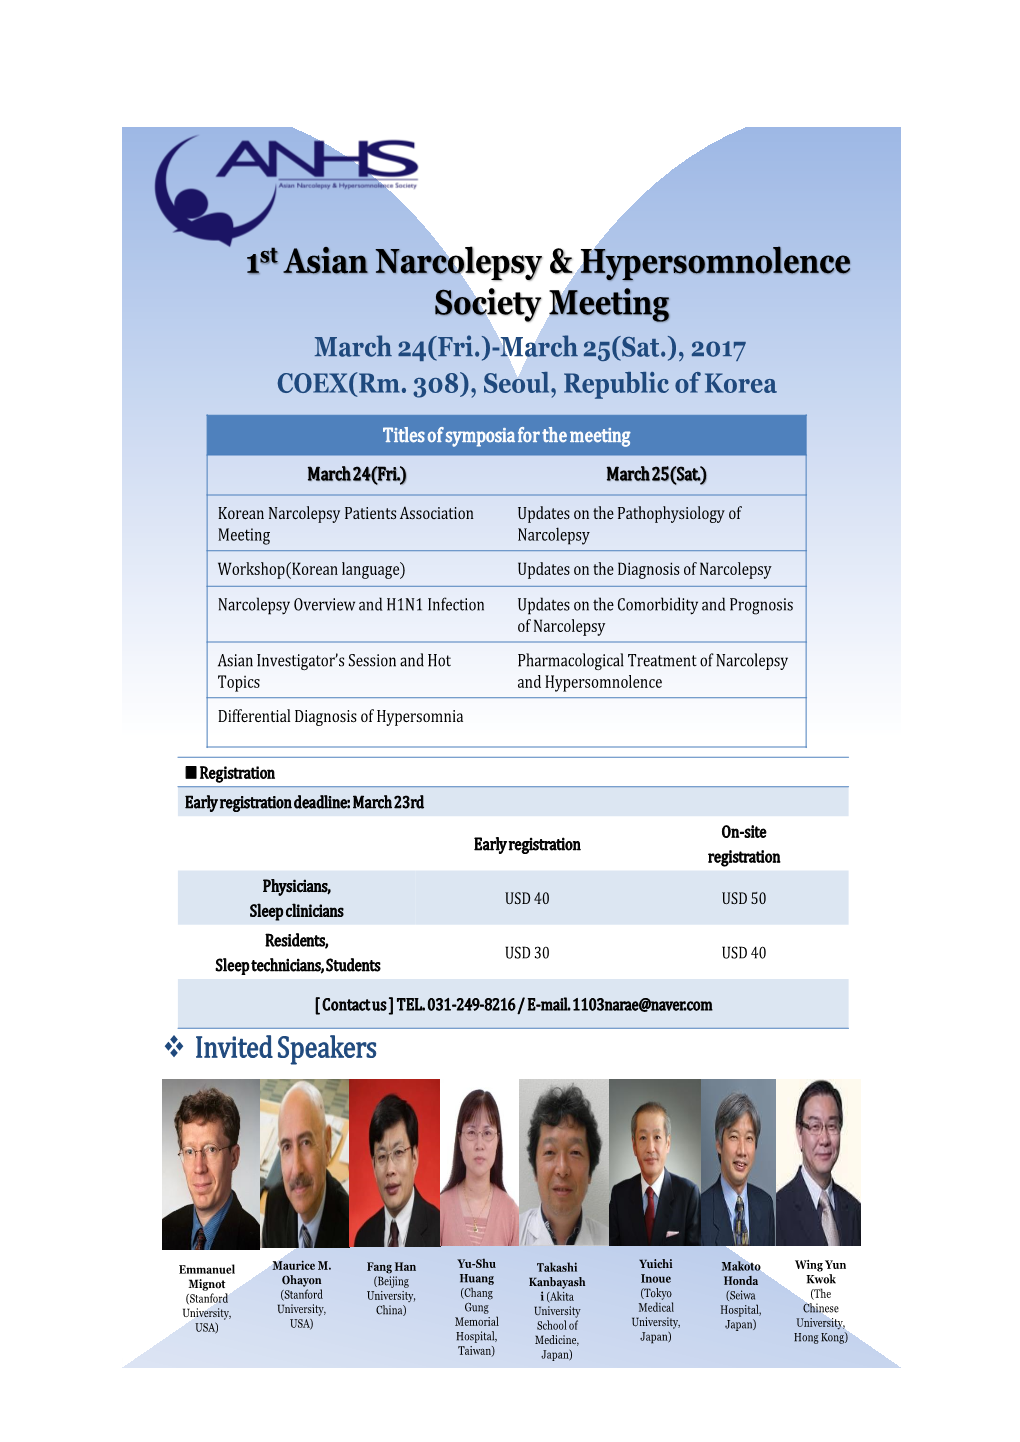 1St Asian Narcolepsy & Hypersomnolence Society Meeting